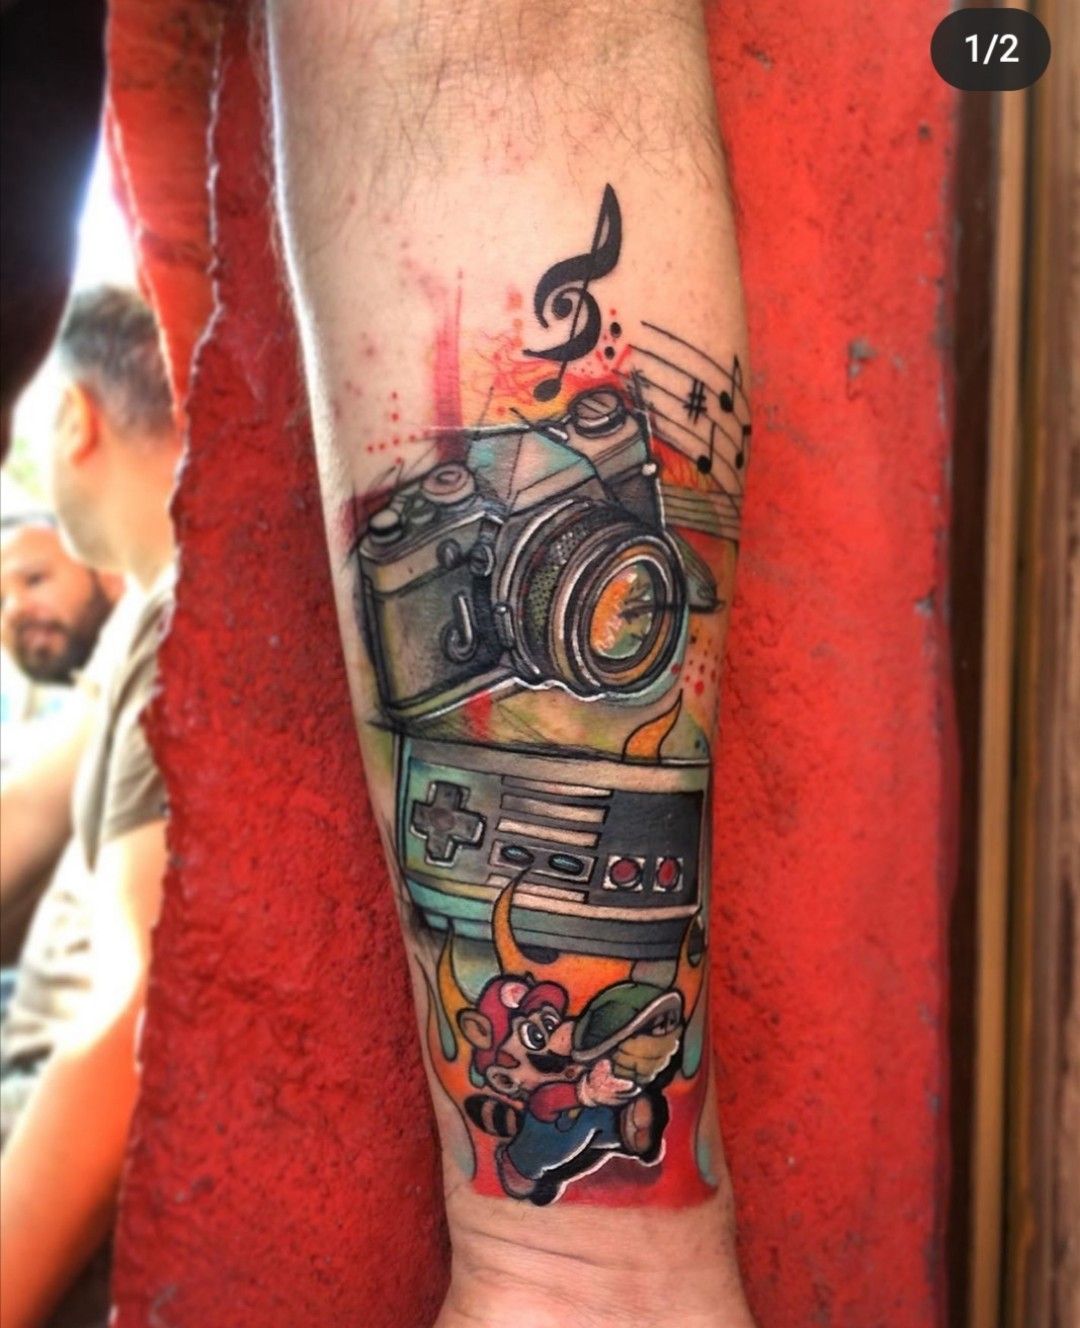 Old School Gas Pump by Amber Thorpe at Adept in Halifax NS  rtattoos